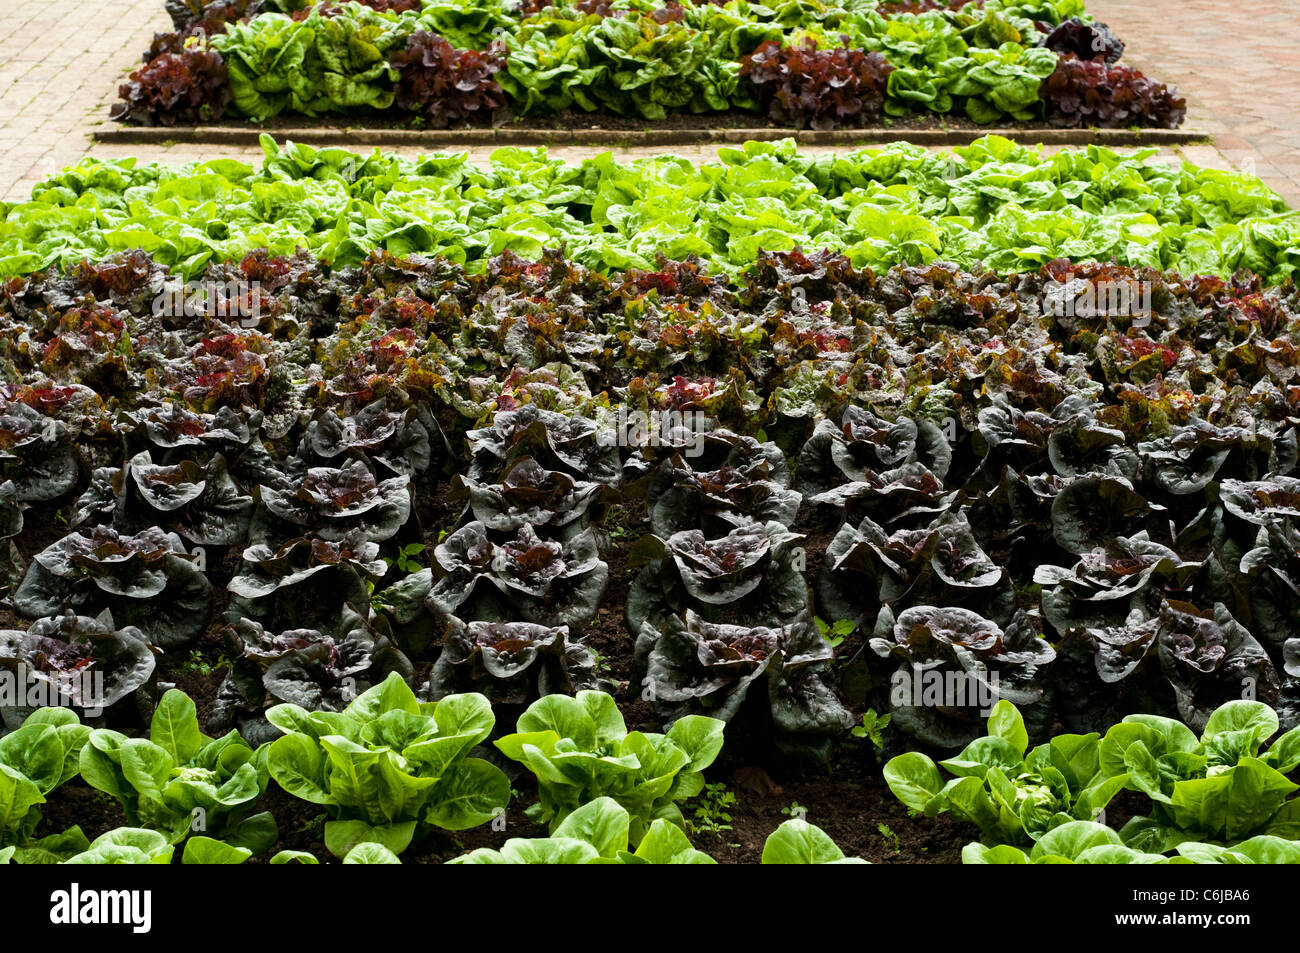 Lettuce, Lactuca sativa 'Little Gem', 'Pandero', 'Mottistone', 'All the Year Round' and 'Salad Bowl Mixed' (front to back) Stock Photo